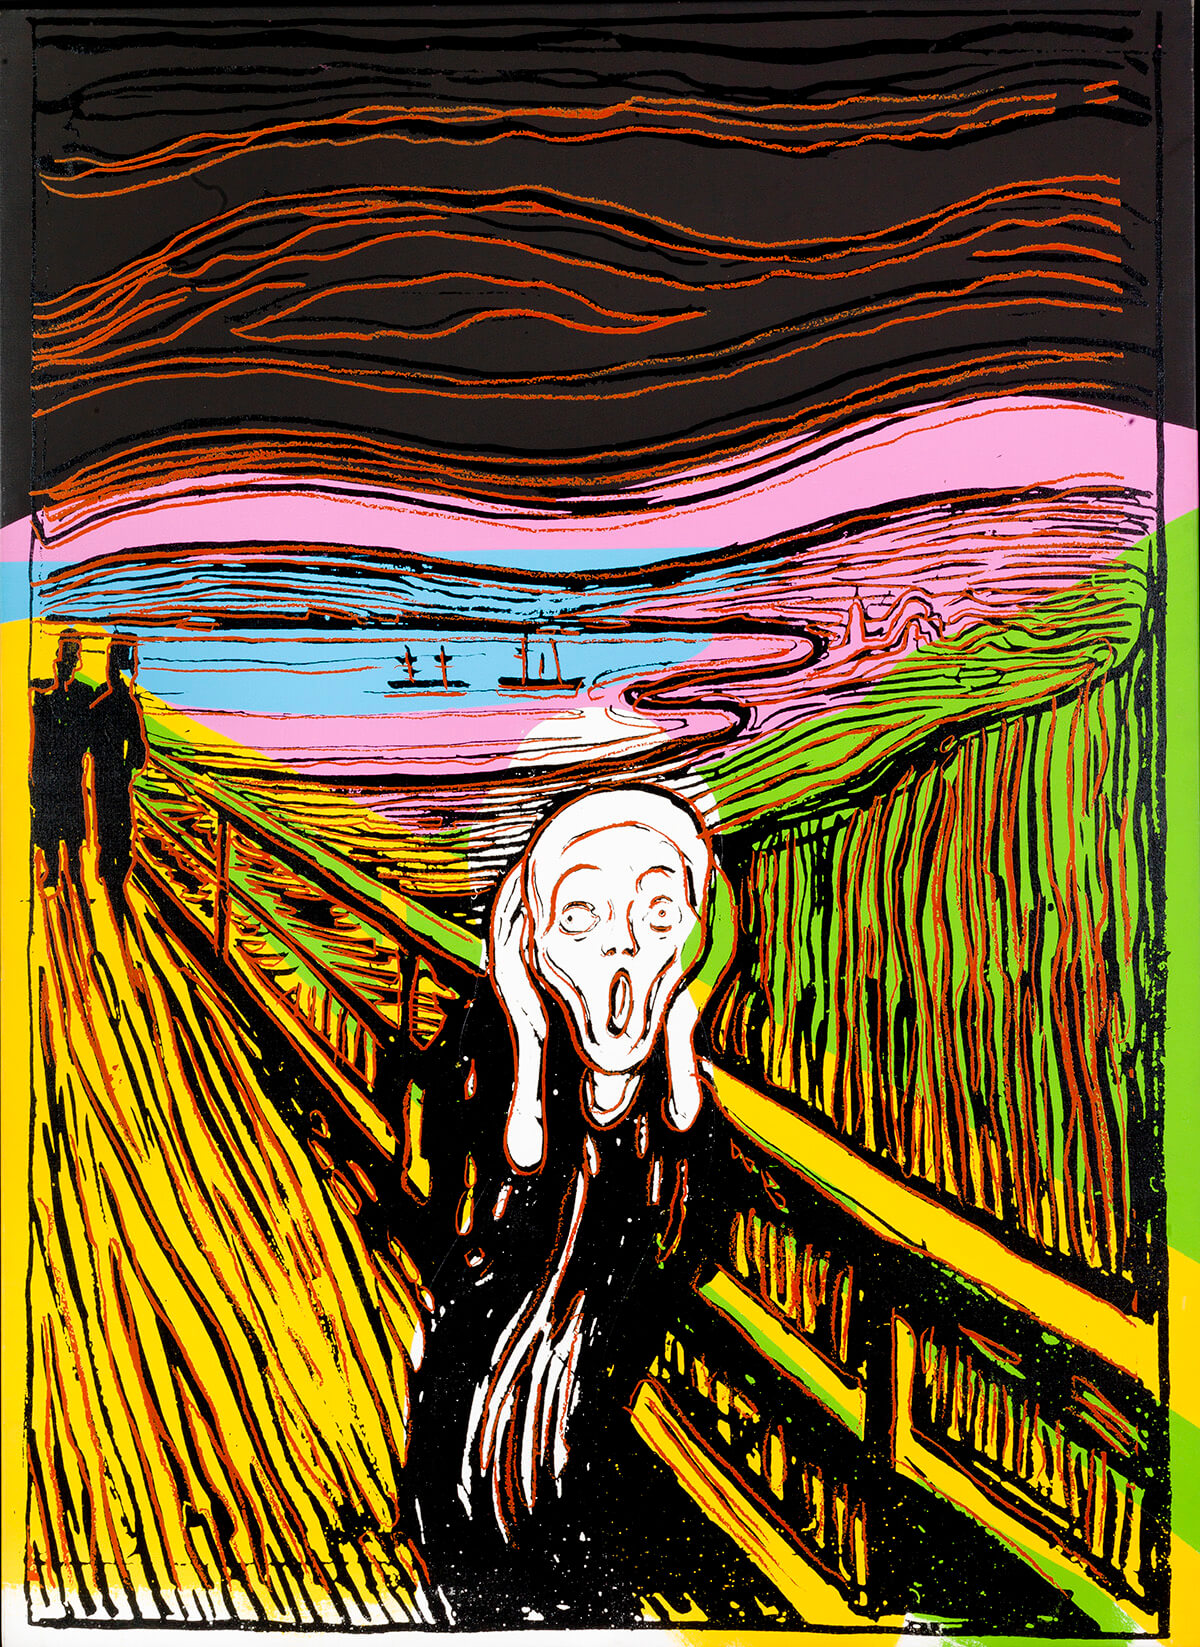 Andy Warhol: The Scream (After Munch), 1984. © The Andy Warhol Foundation for the Visual Arts